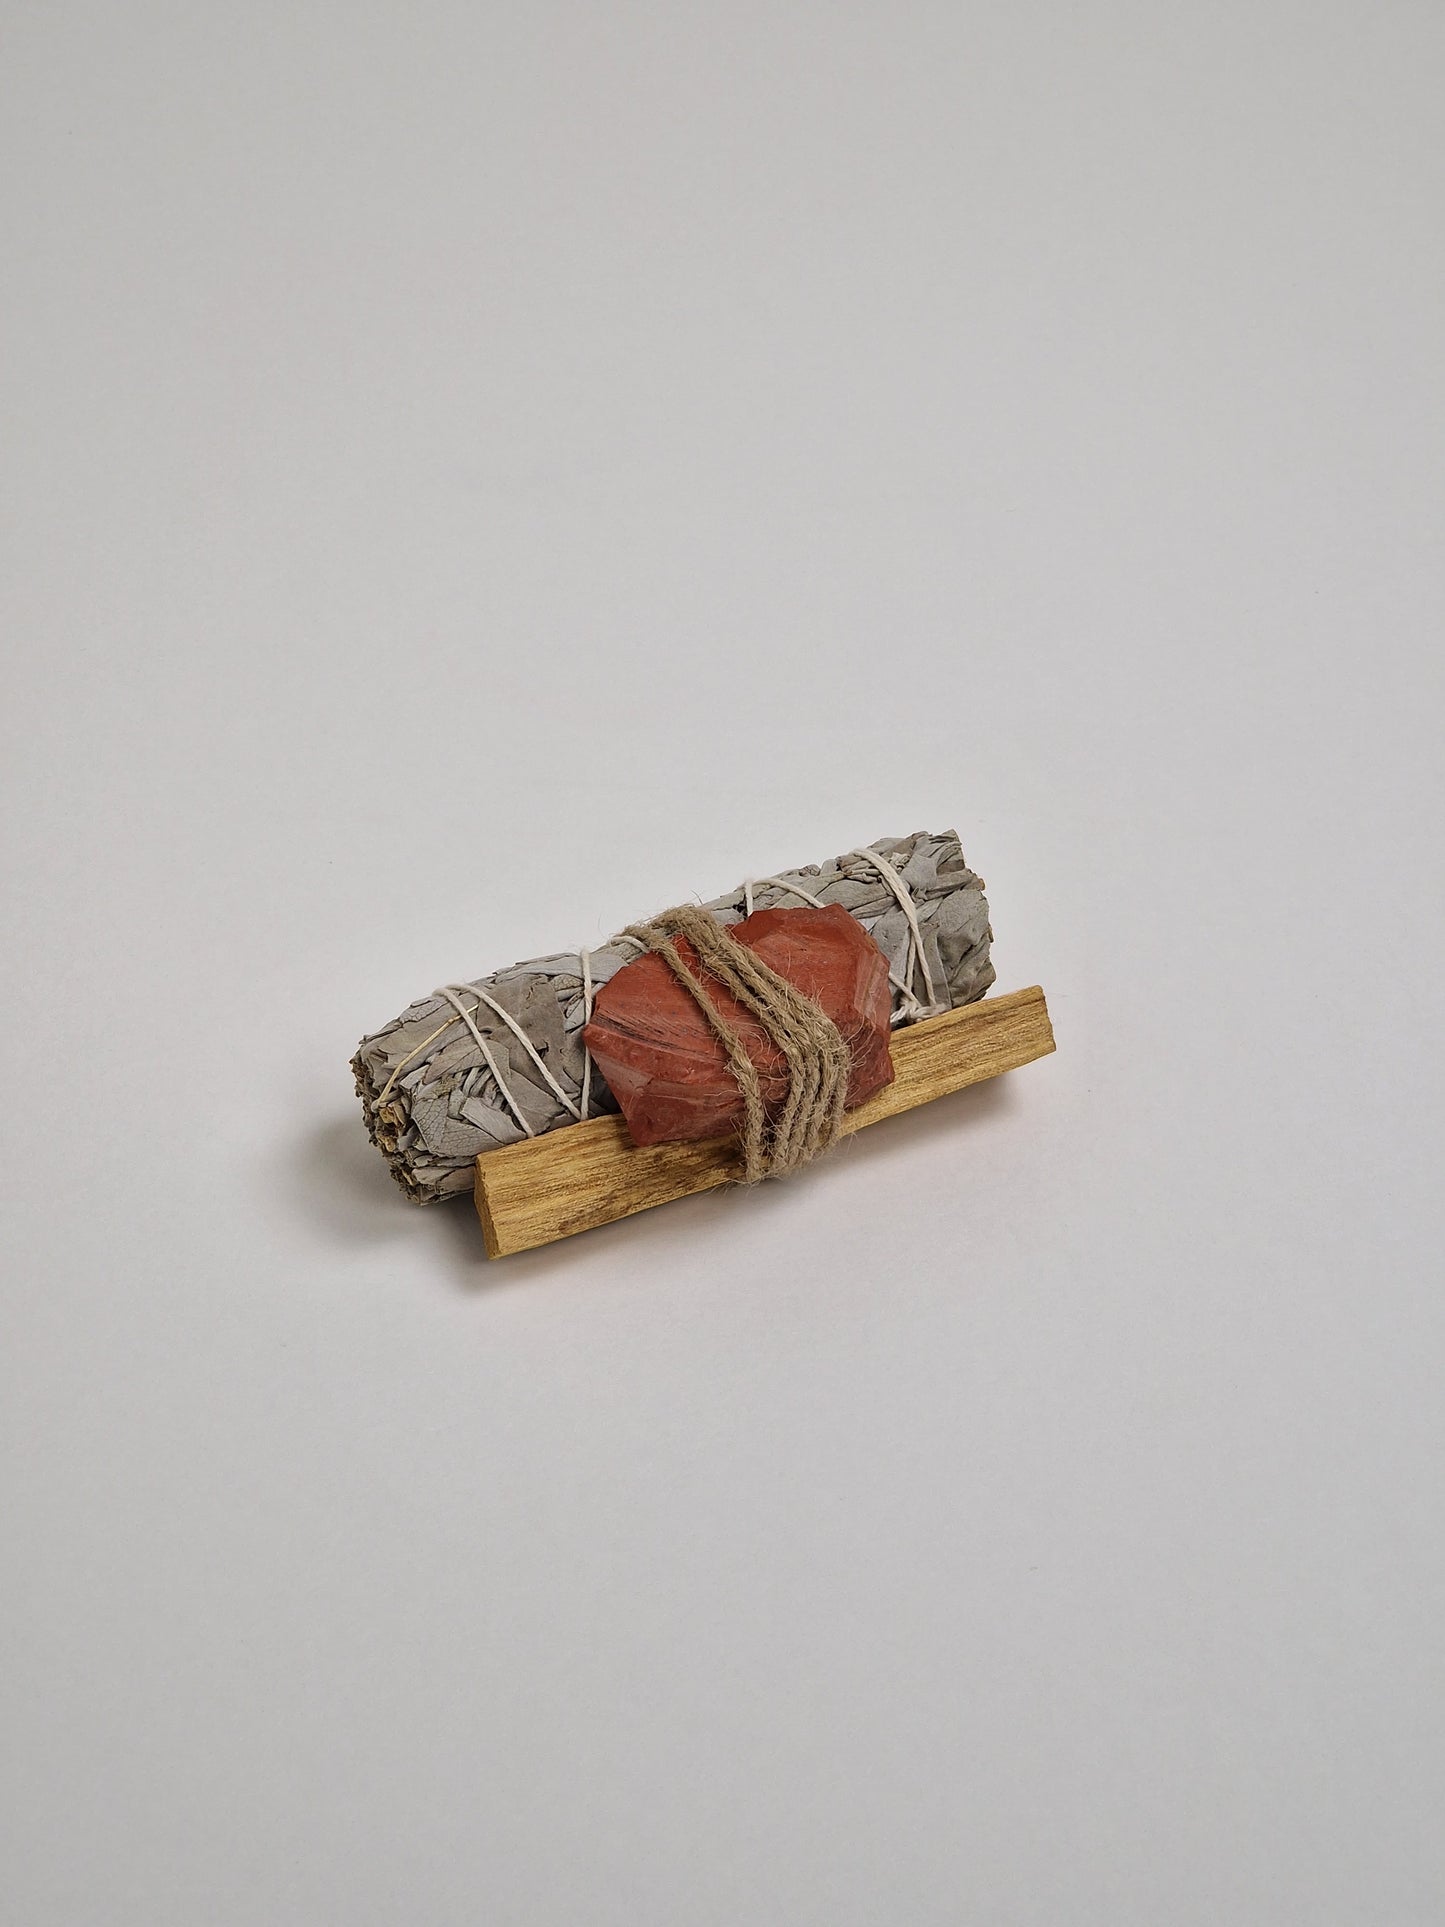 Red Jasper crystal with sage and smudge stick